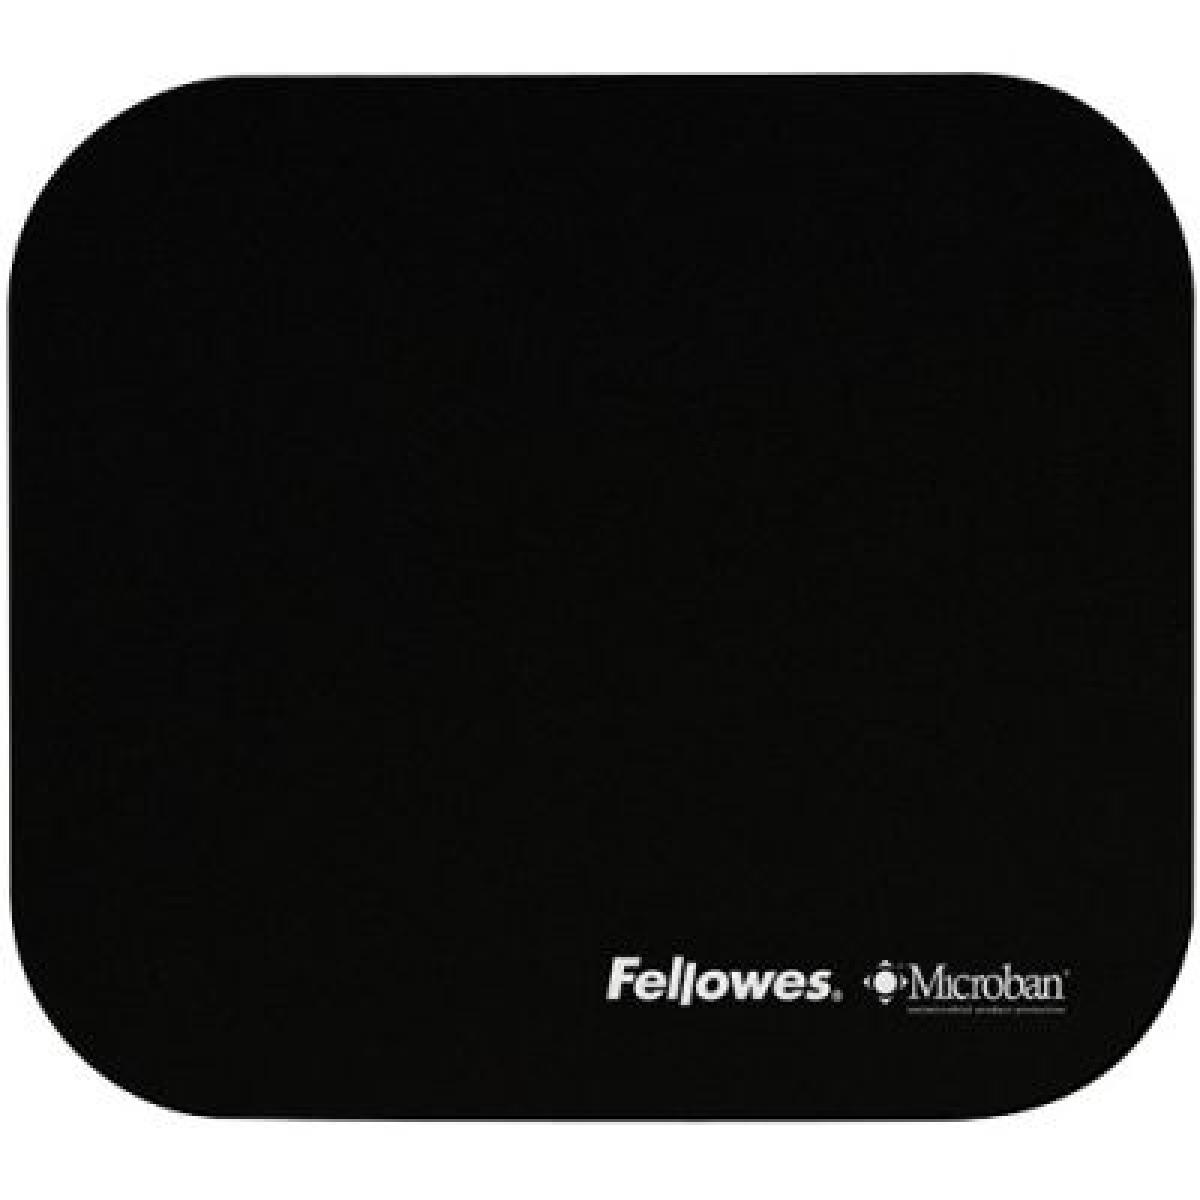 Fellowes Microban Mouse Pad